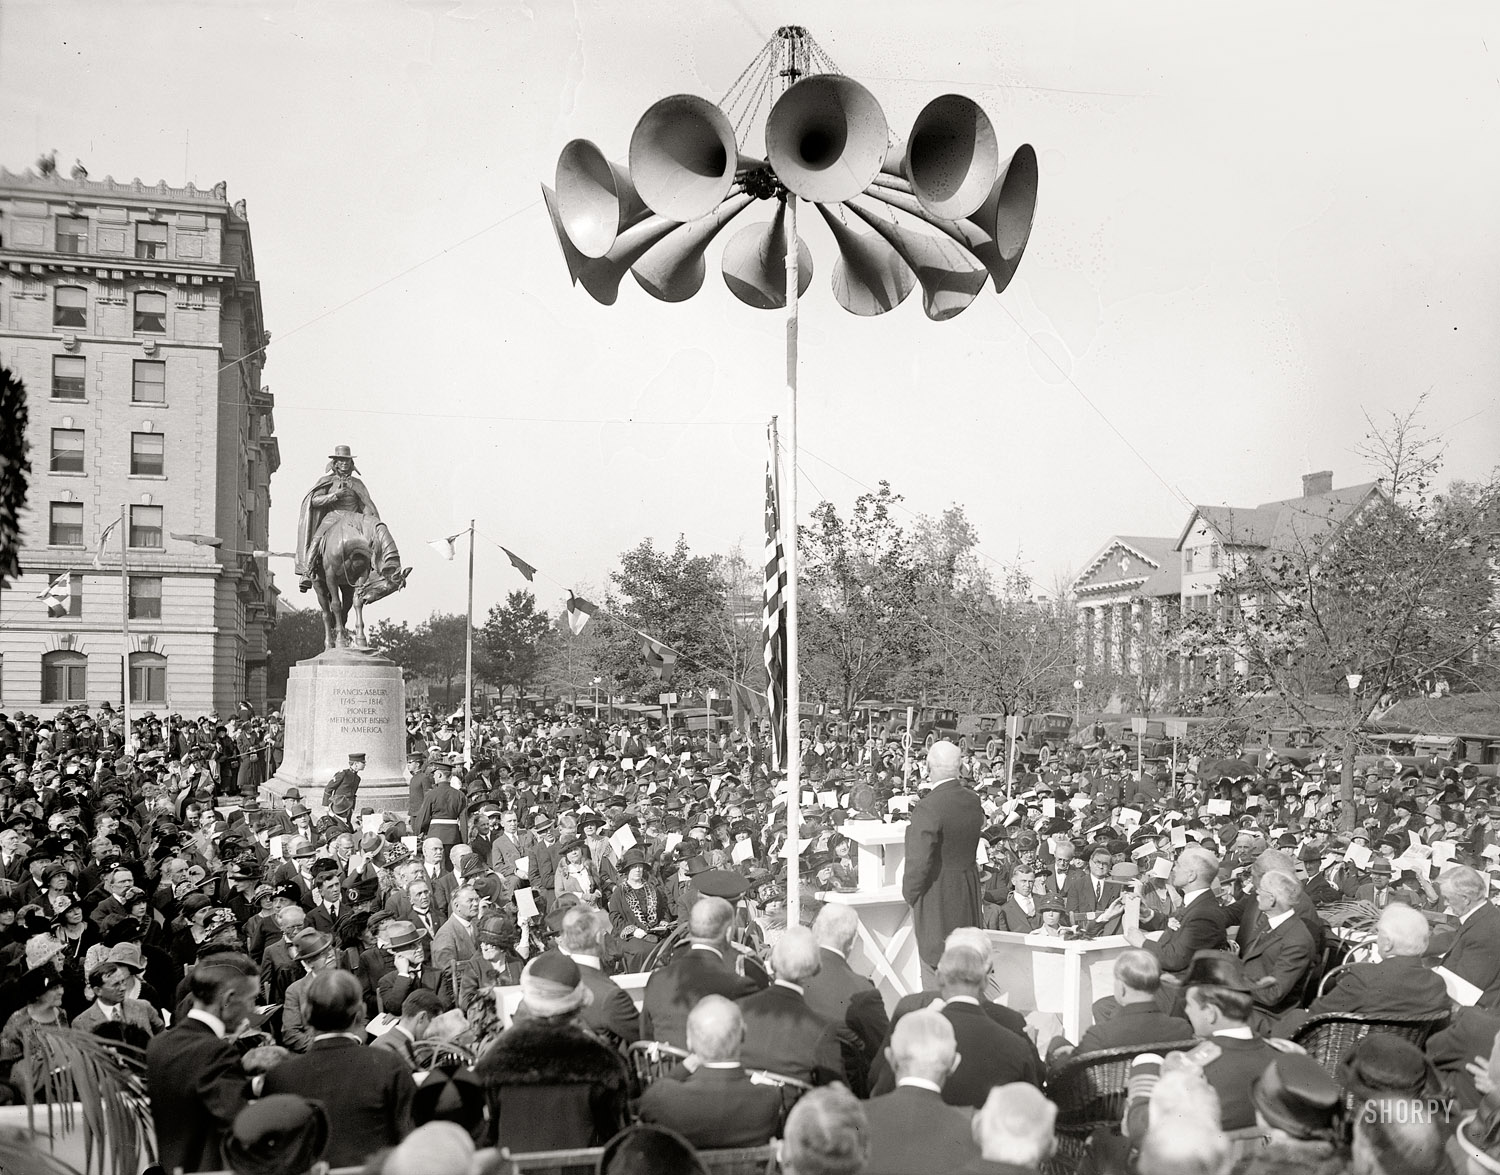 October 15, 1924. "Dedication of Francis Asbury statue, Washington, D.C." National Photo Company Collection glass negative. View full size.